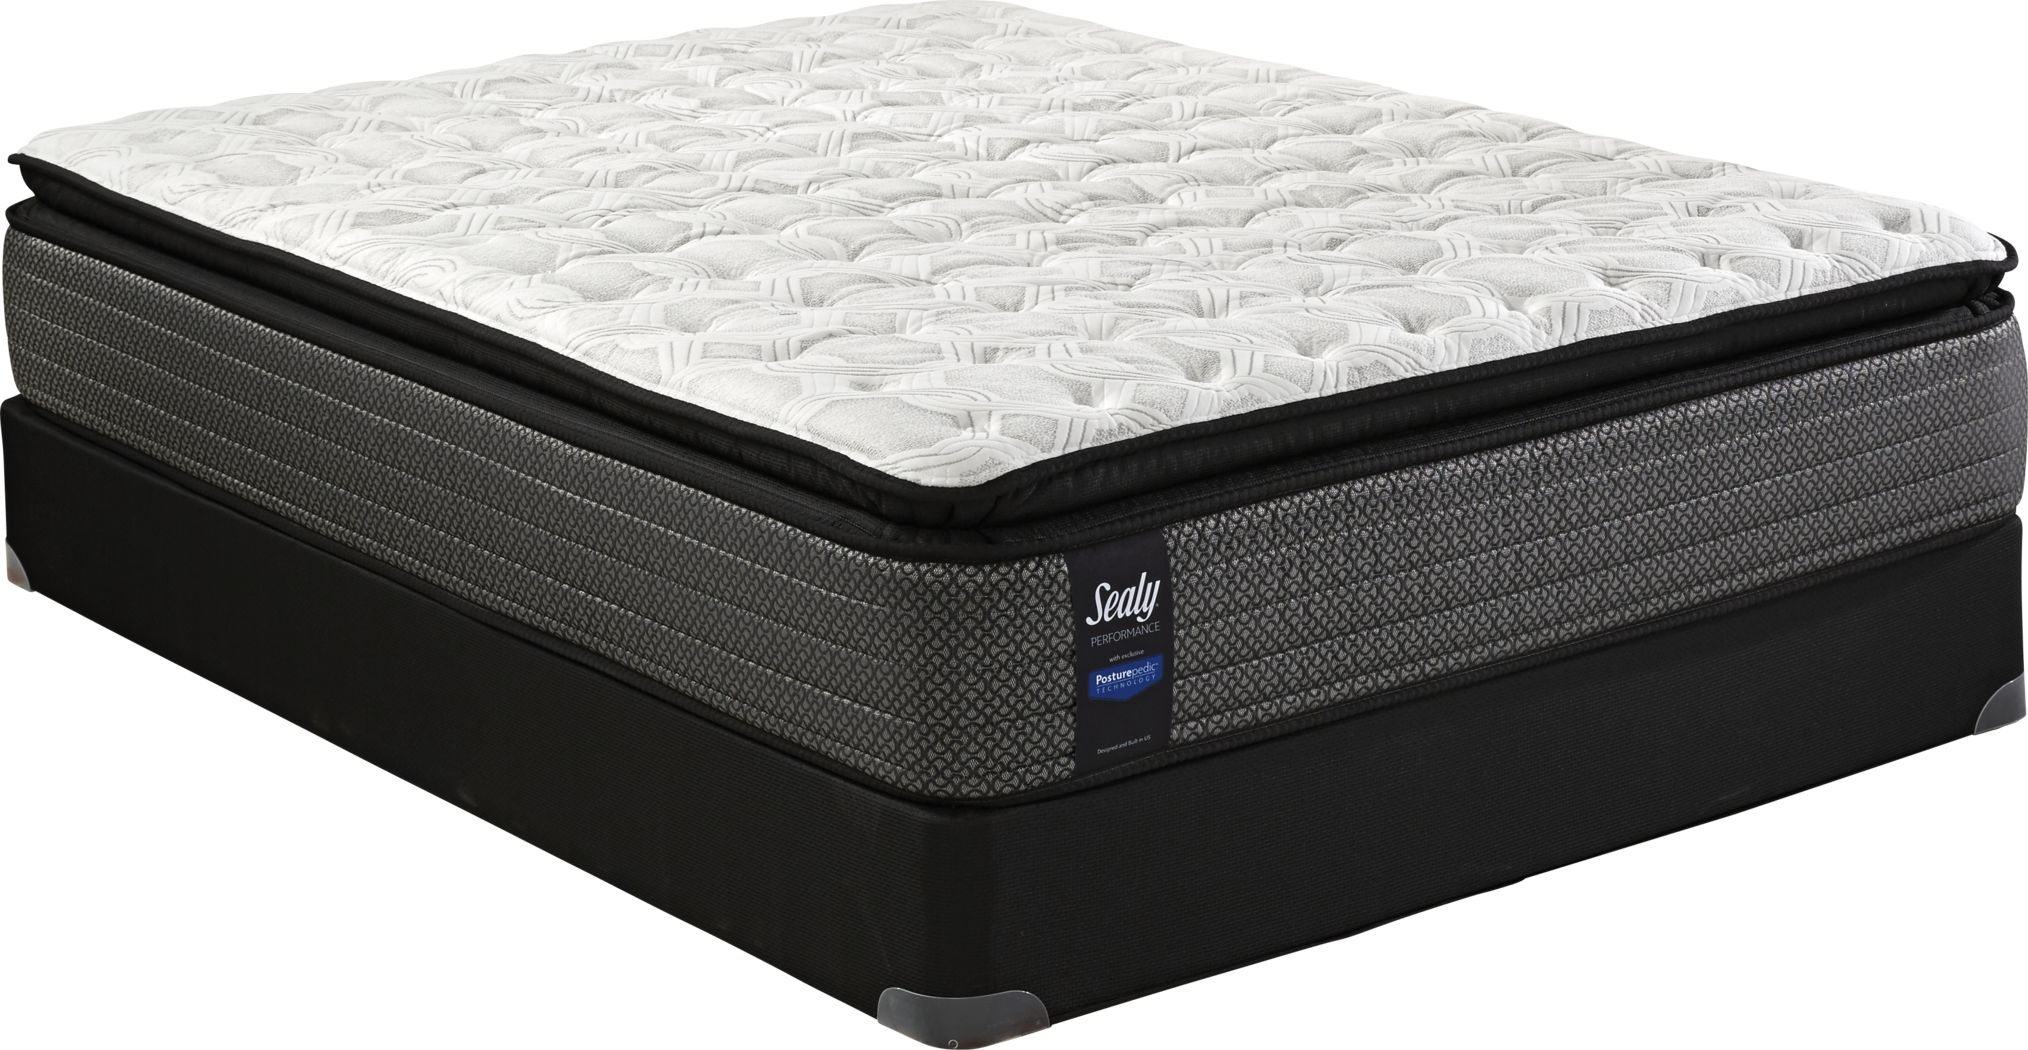 sealy moonbeam firm queen mattress and boxspring set